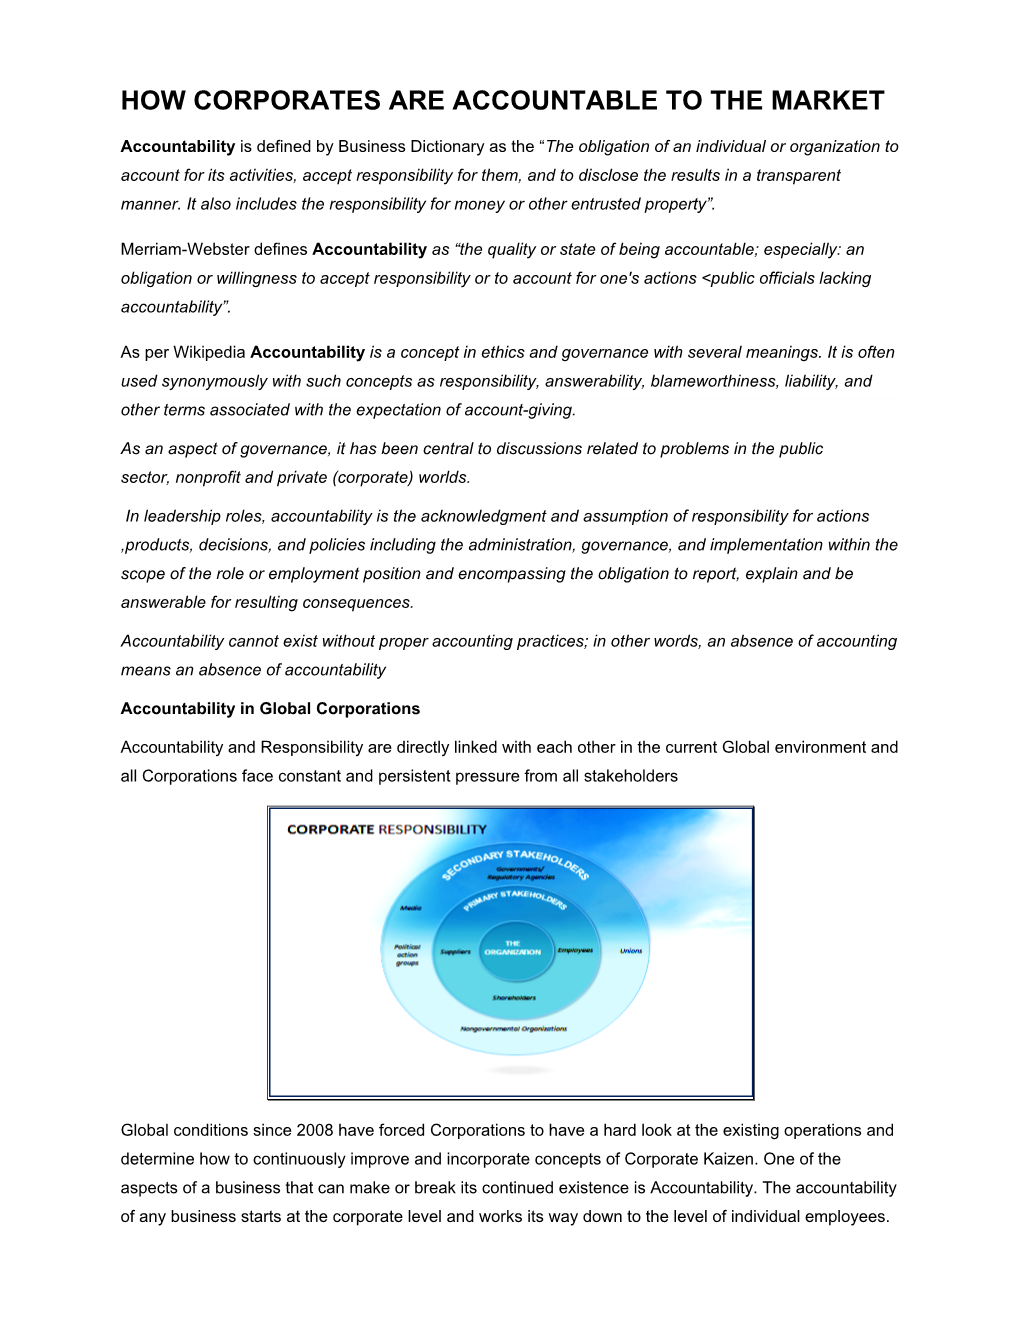 How Corporates Are Accountable to the Market.Pdf